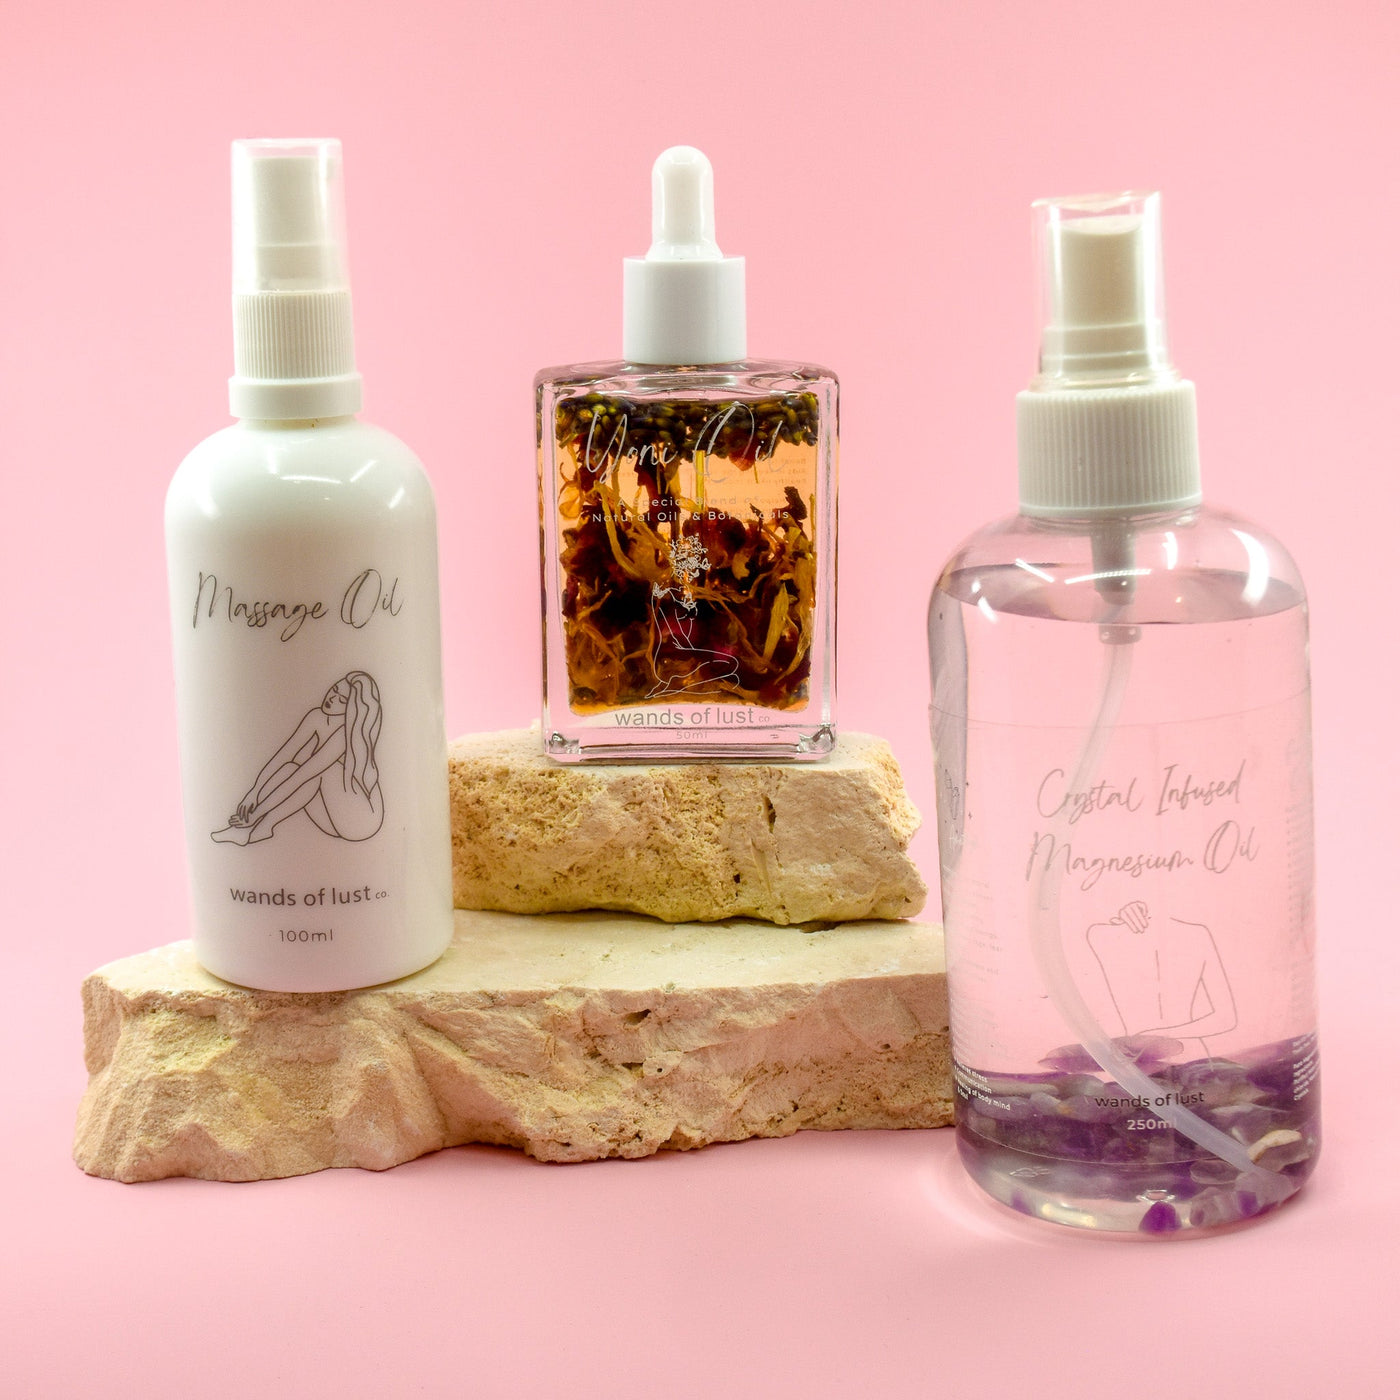 Ultimate Bundle Pack Natural Yoni Oil + 100ml Massage Oil + Crystal infused Magnesium oil - Wands of Lust Co